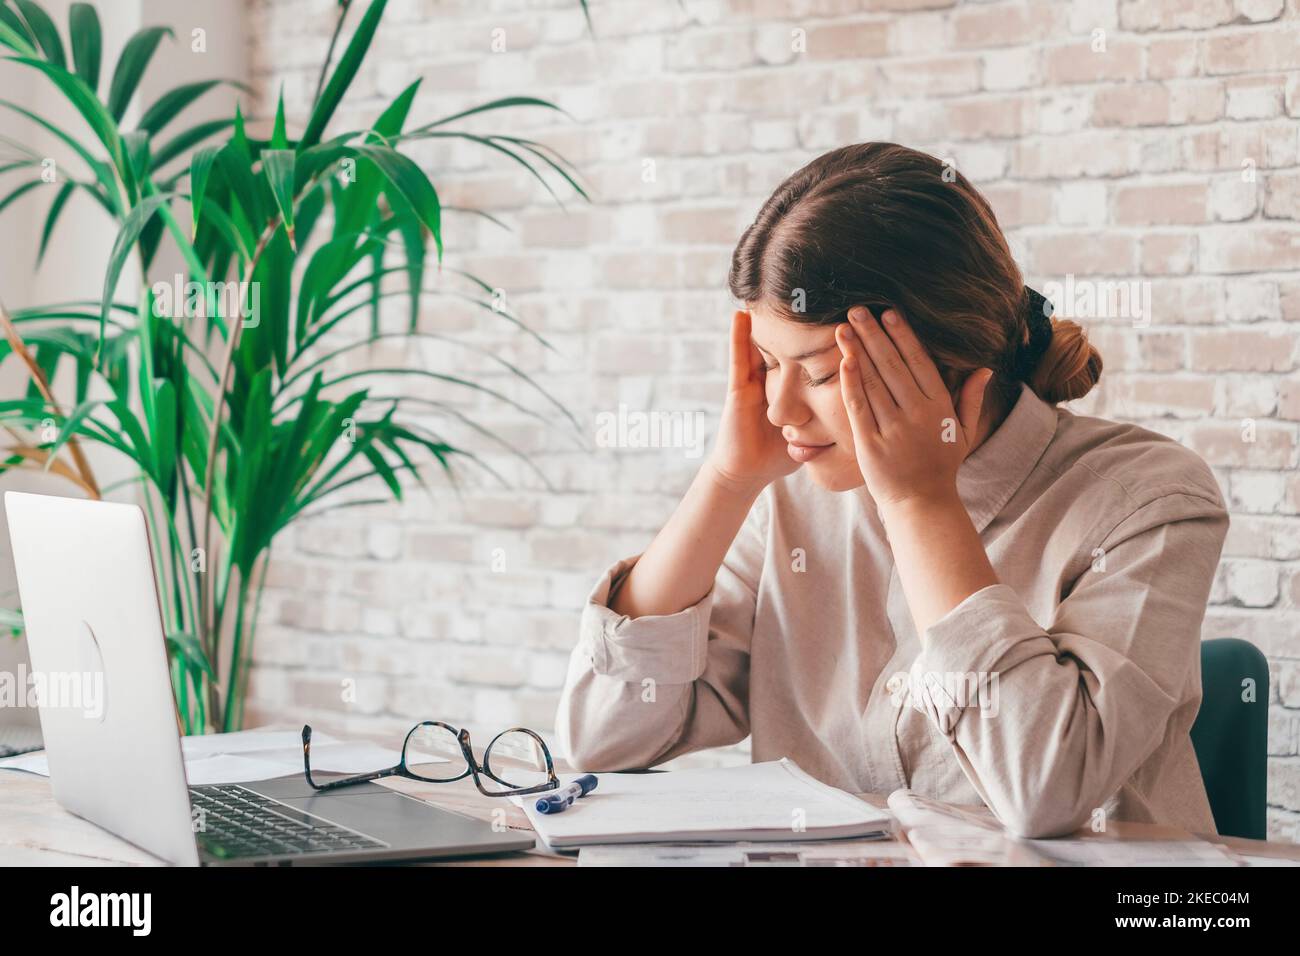 Tired bored teenage girl school student feeling headache or fatigue doing homework at home. Exhausted depressed sick teenager studying alone worried about difficult education problems concept. Stock Photo